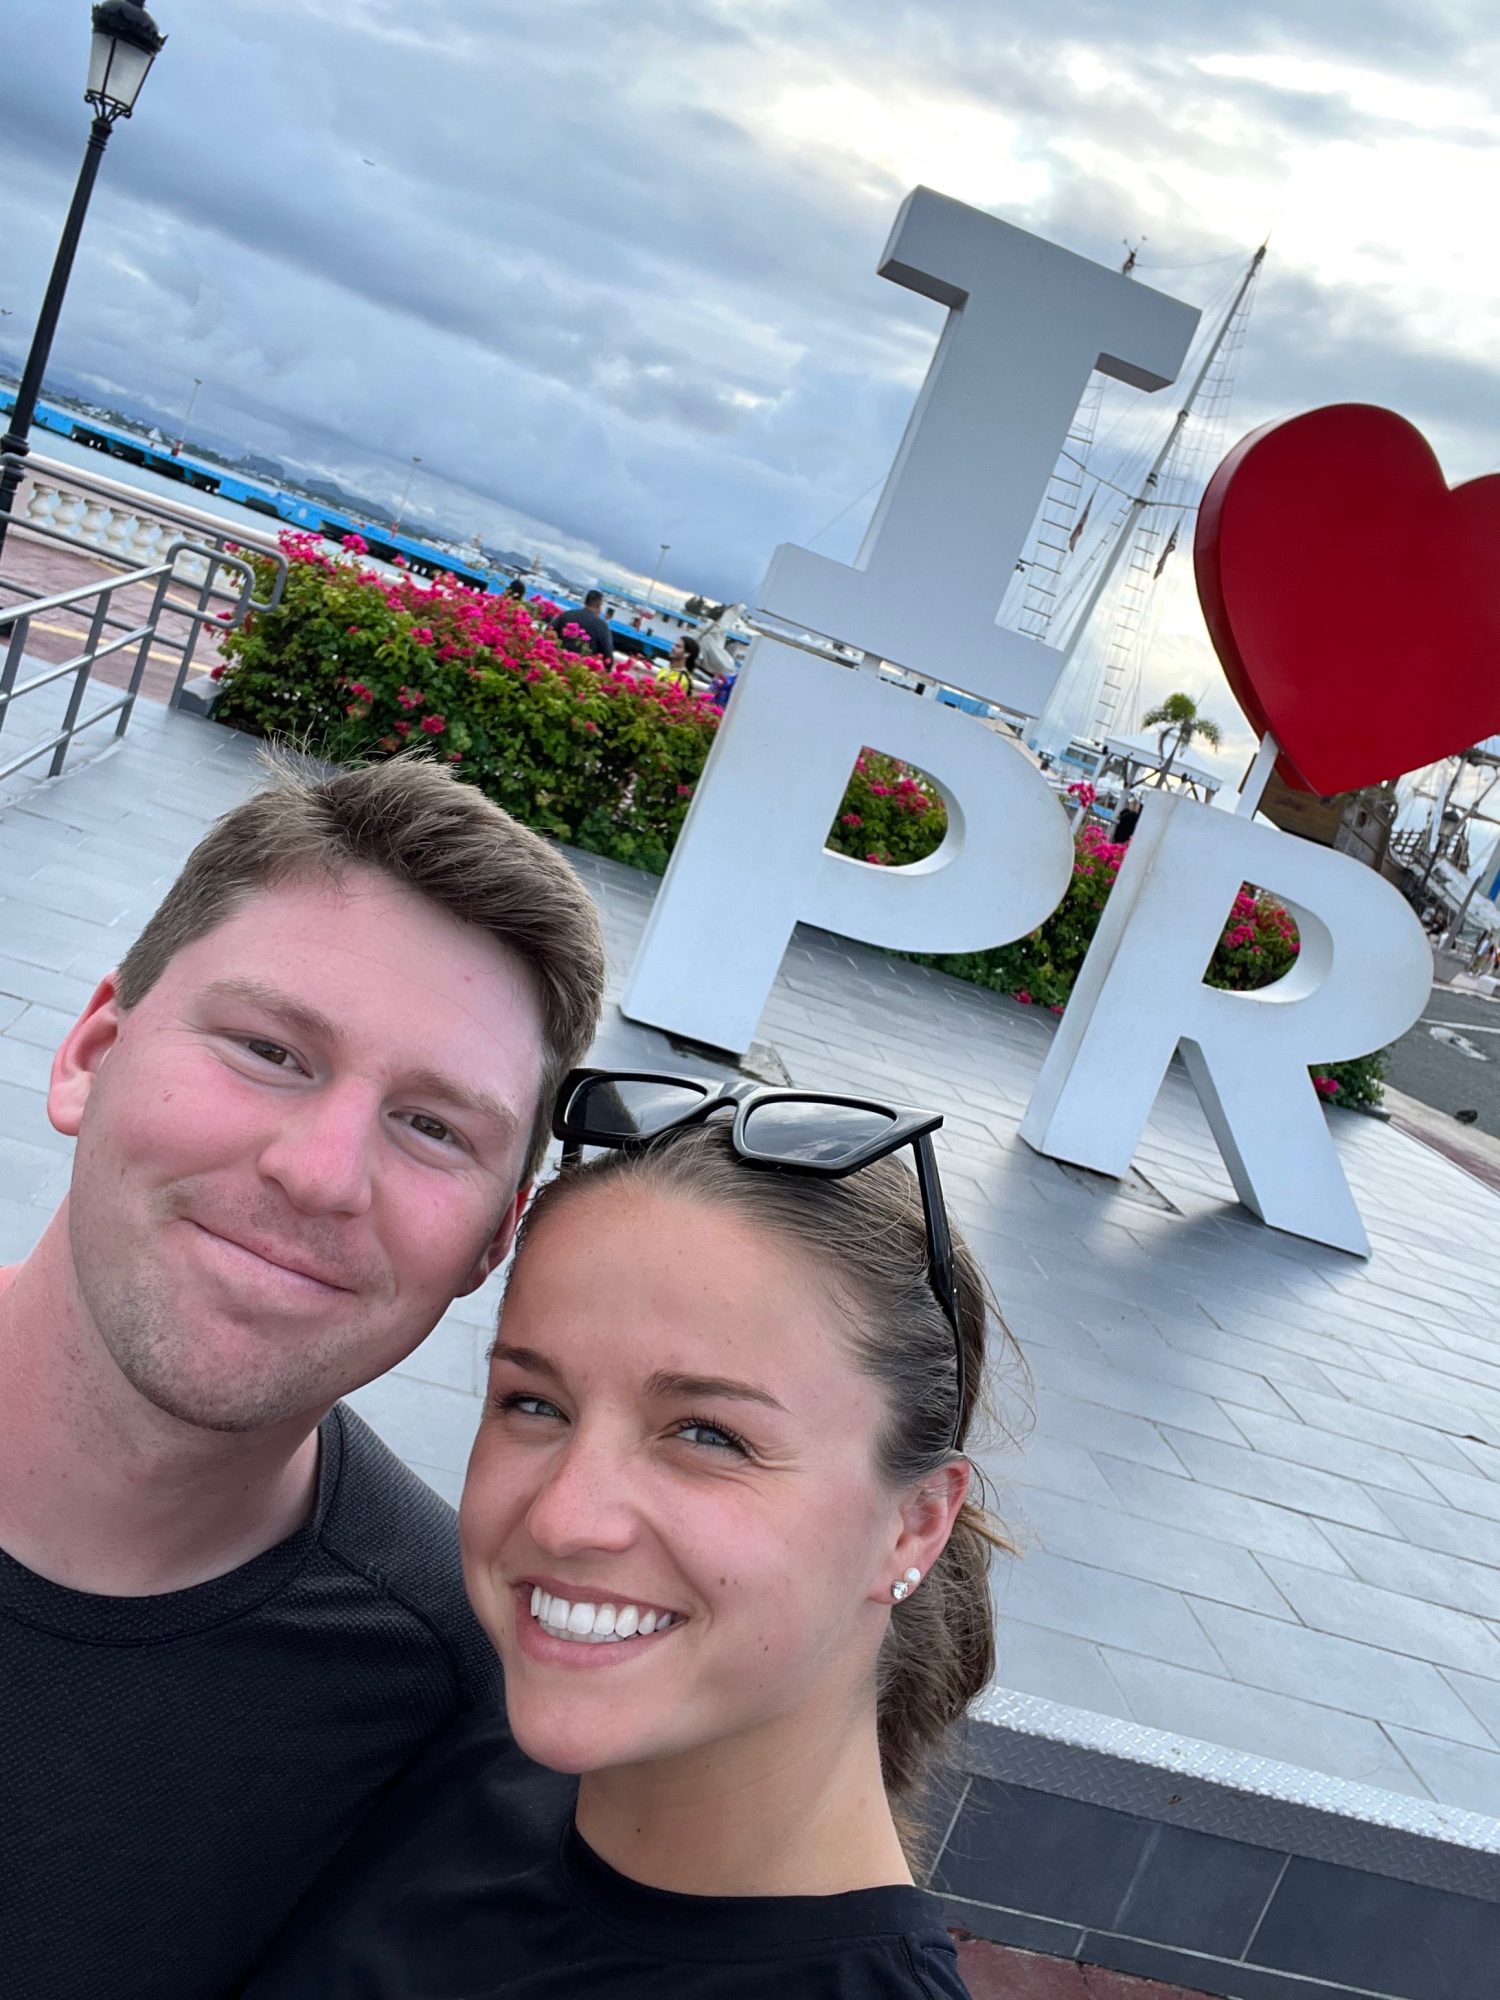 man and woman taking a selfie in front of the 'I heart PR' sign.